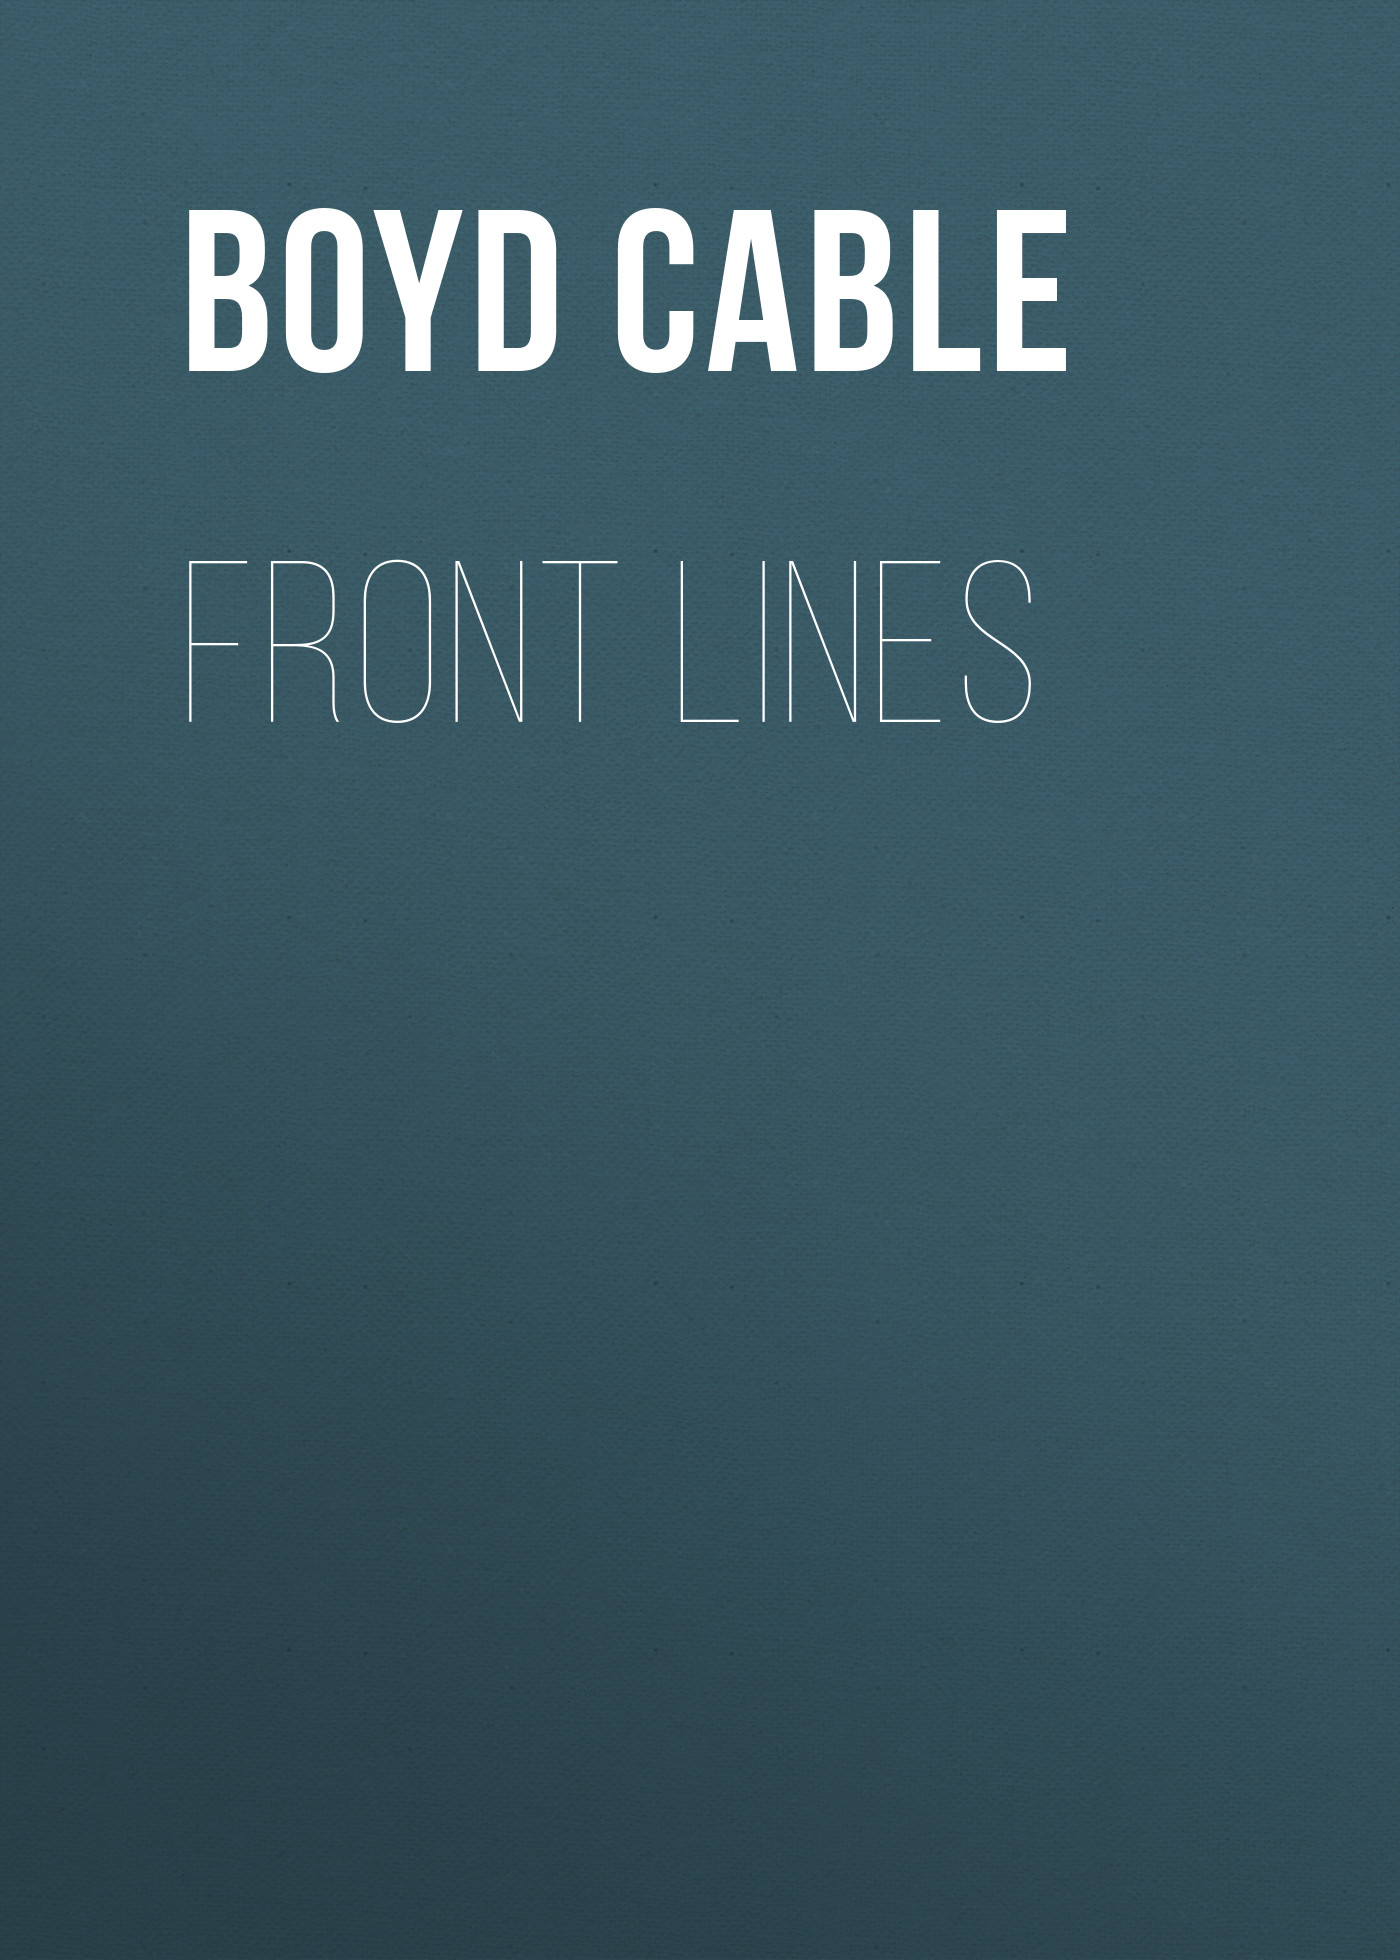 Cable Boyd Front Lines